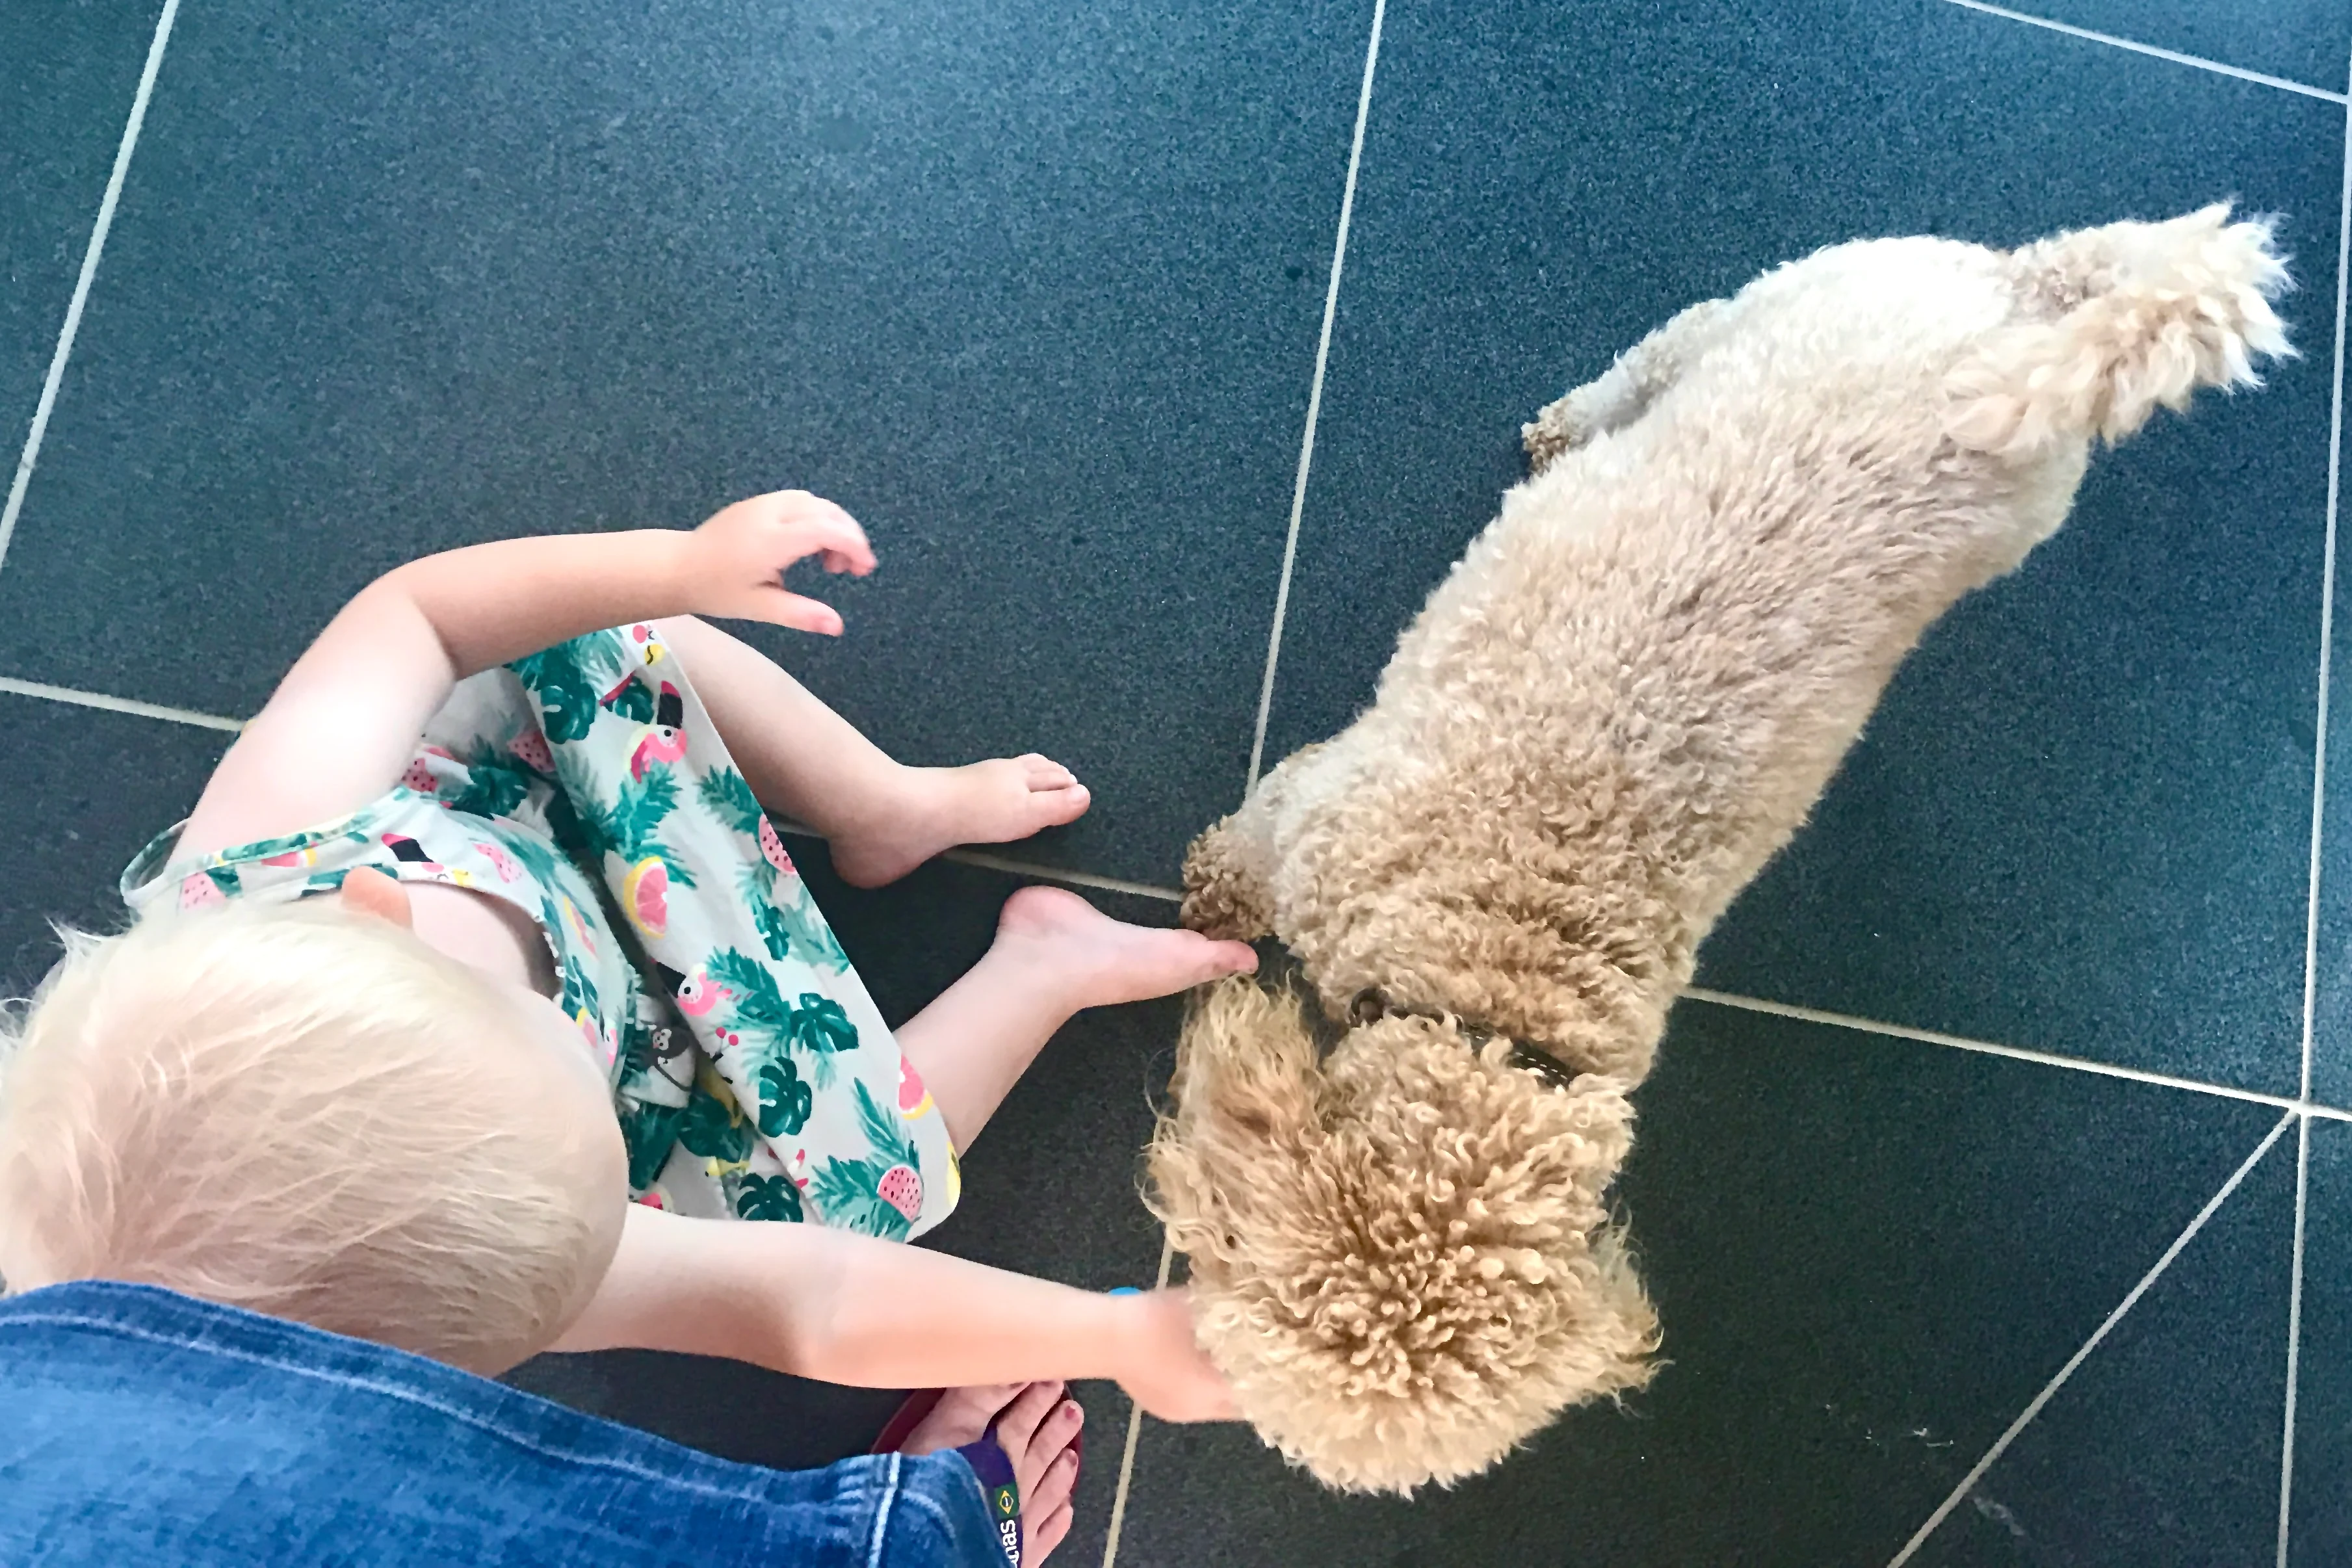 A young child playing with a new puppy on the floor